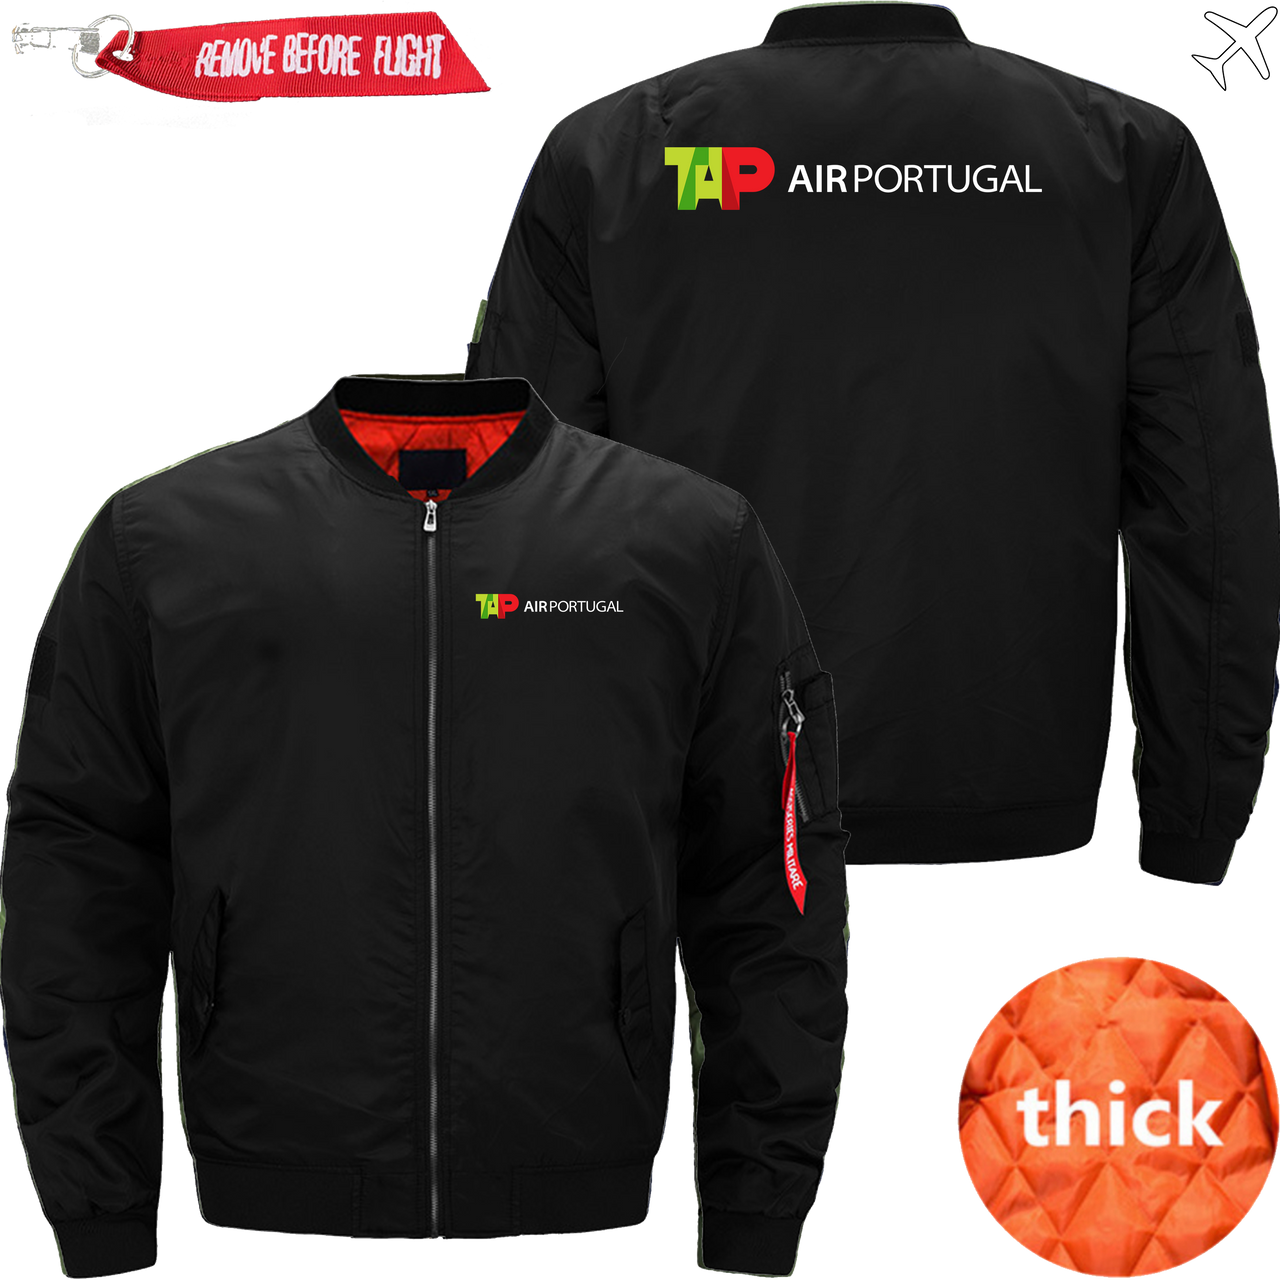 PORTUGAL AIRLINES MA1 JACKET THE AV8R